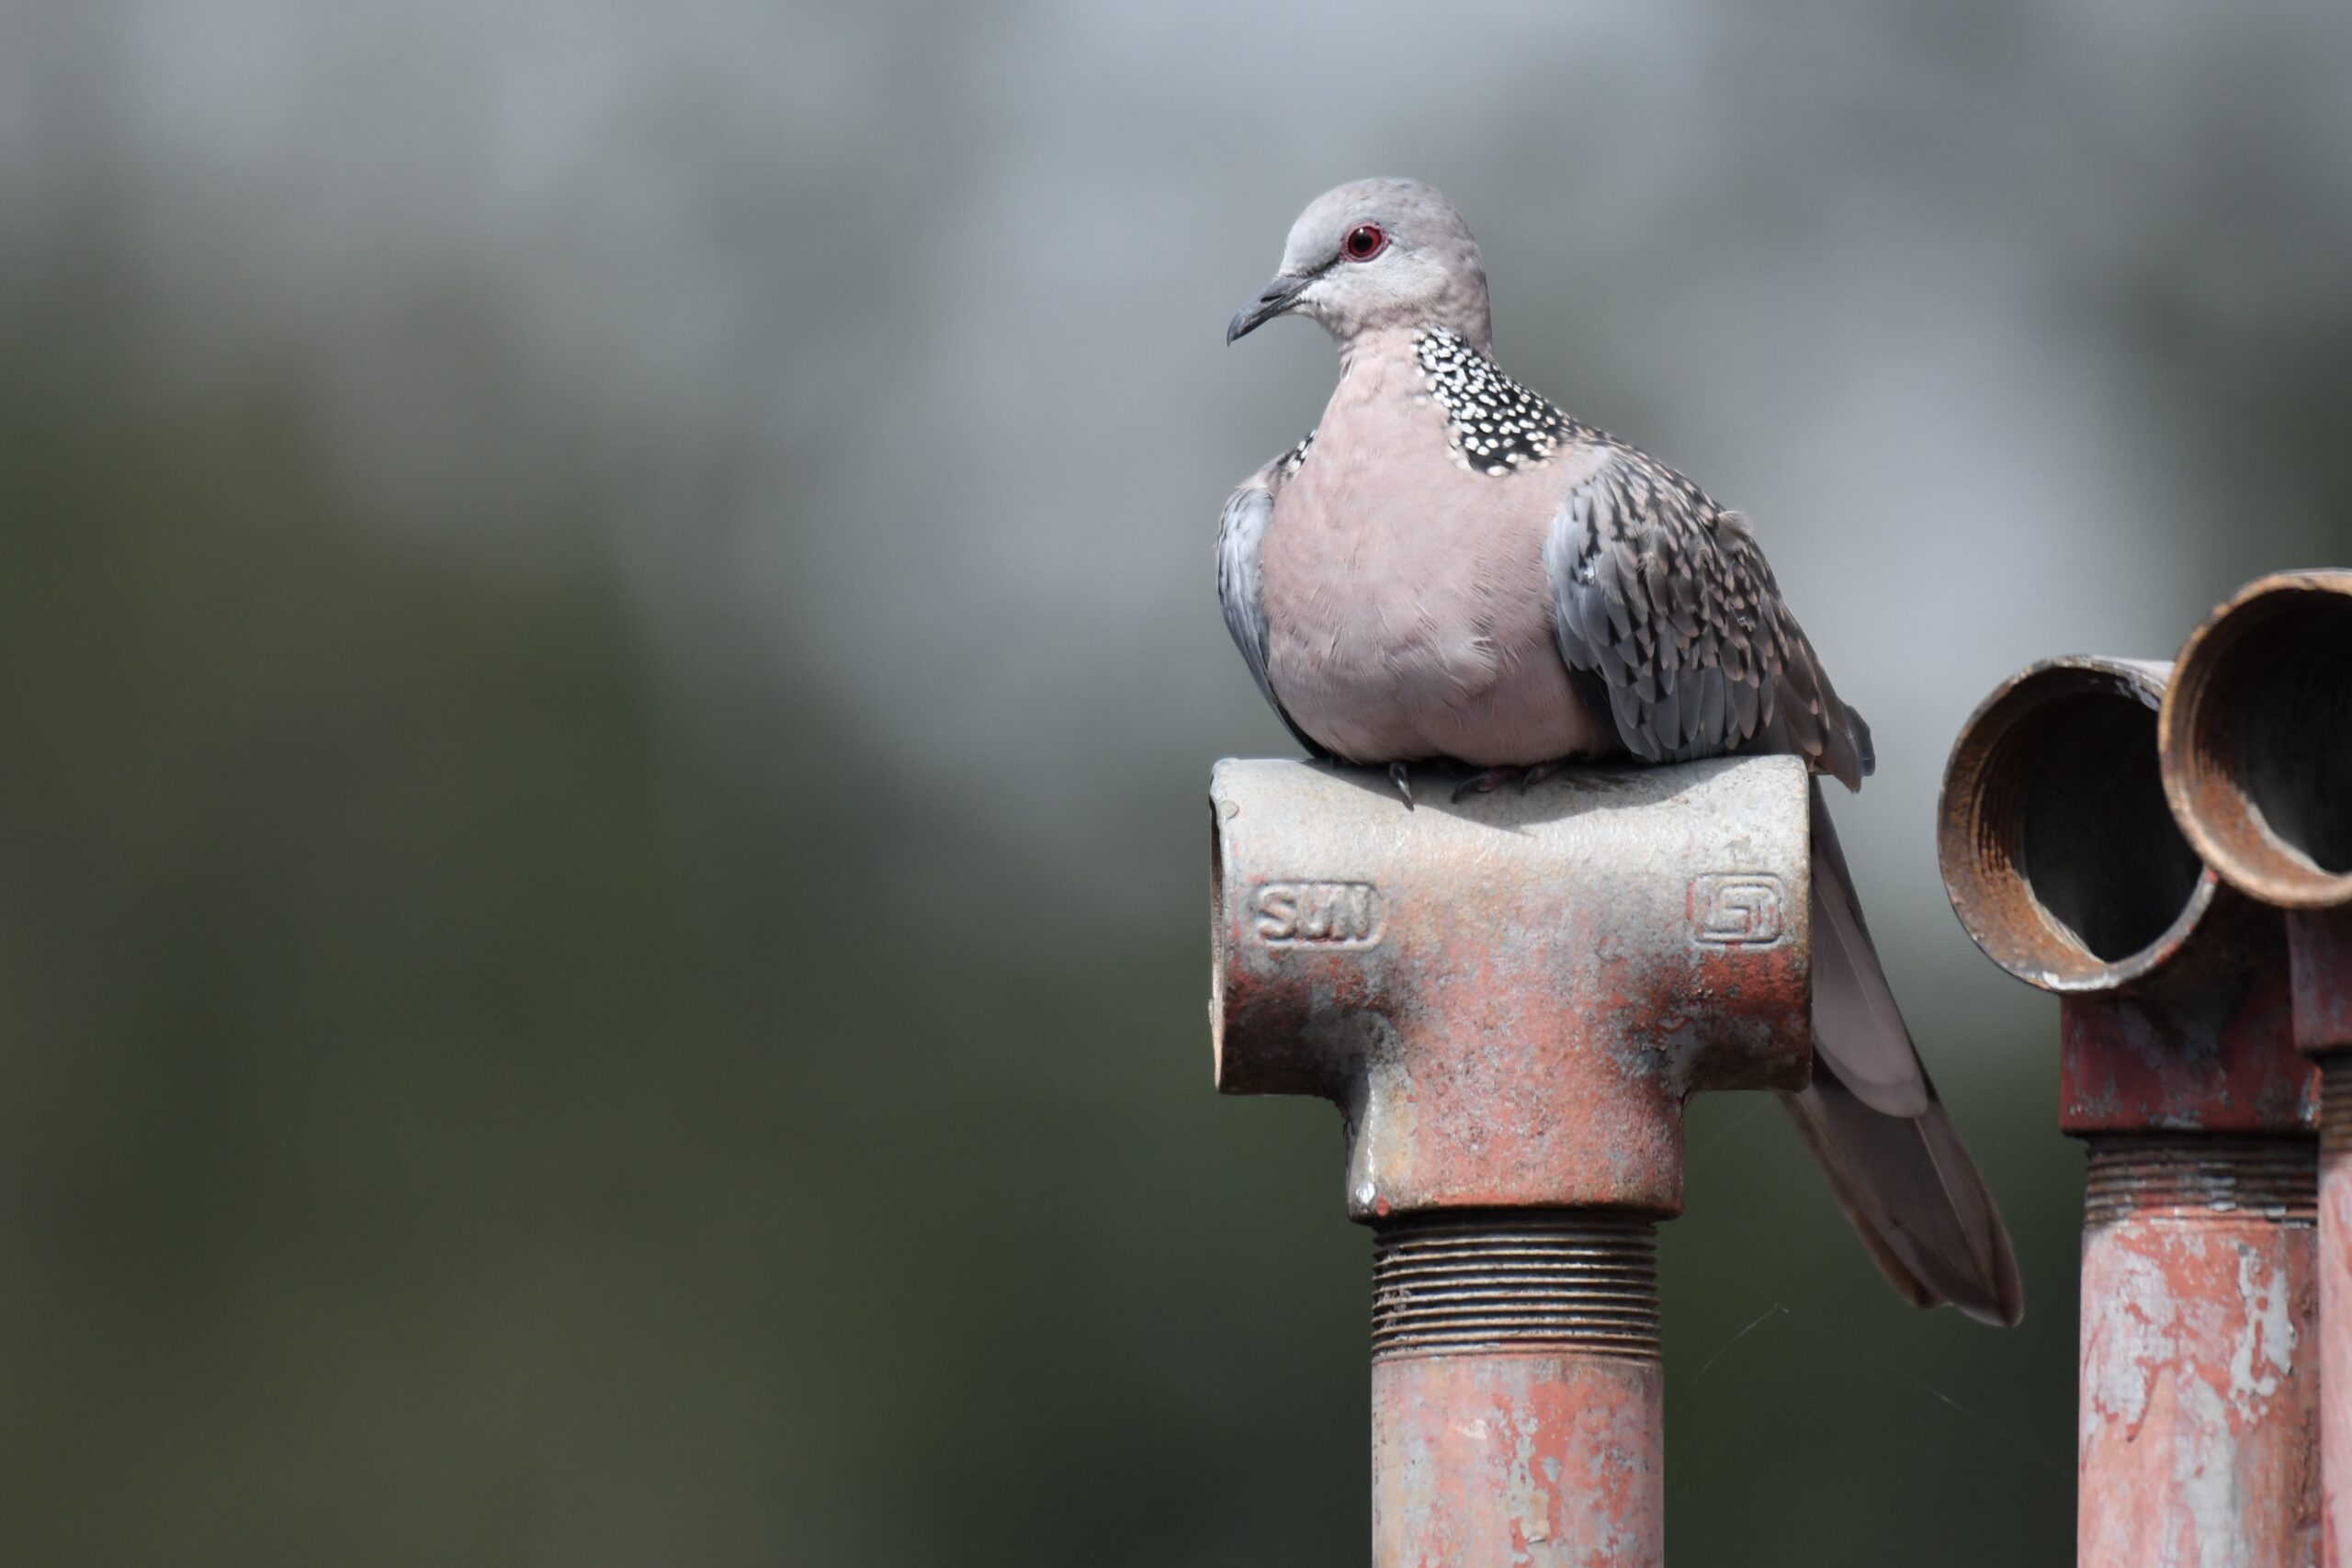 A gray bird with spotted neck and shoulders perches on a pipe.